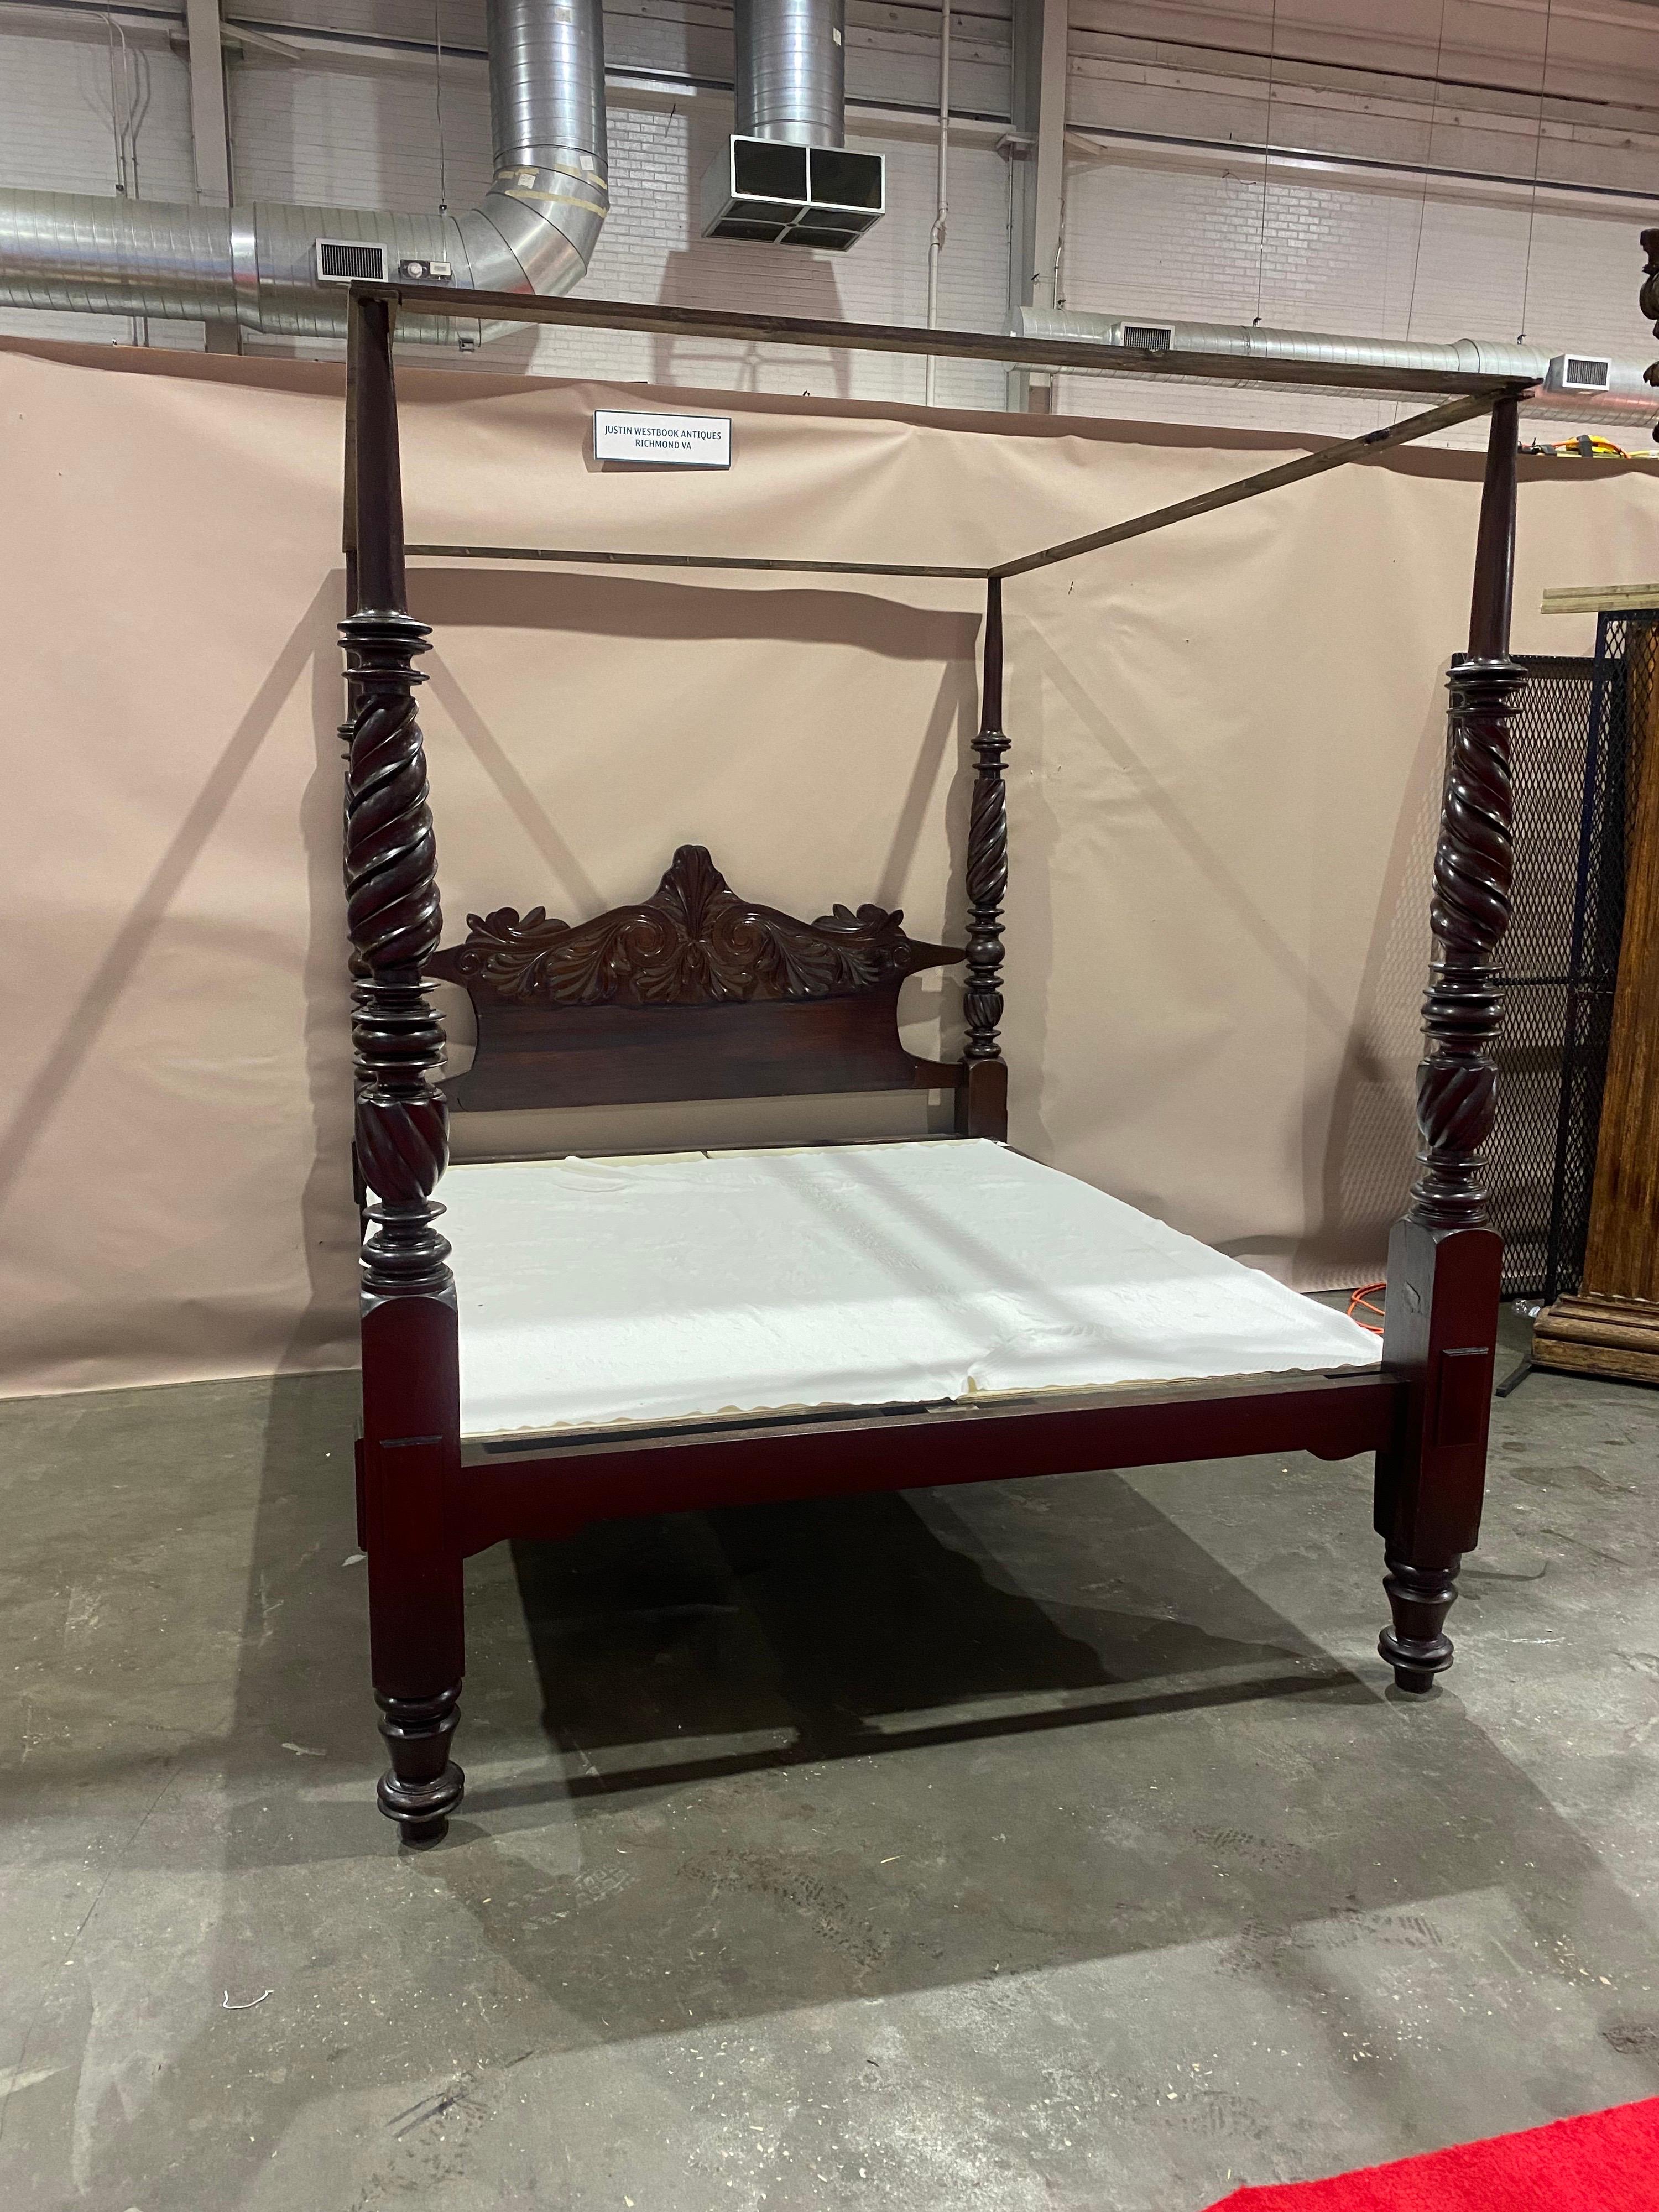 Impressive 19th century West Indies carved mahogany 4 post bed professionally restored and converted to fit a California king mattress. 

Though we like stretching beds to California kings to help with the proportions of the headboard, they can be